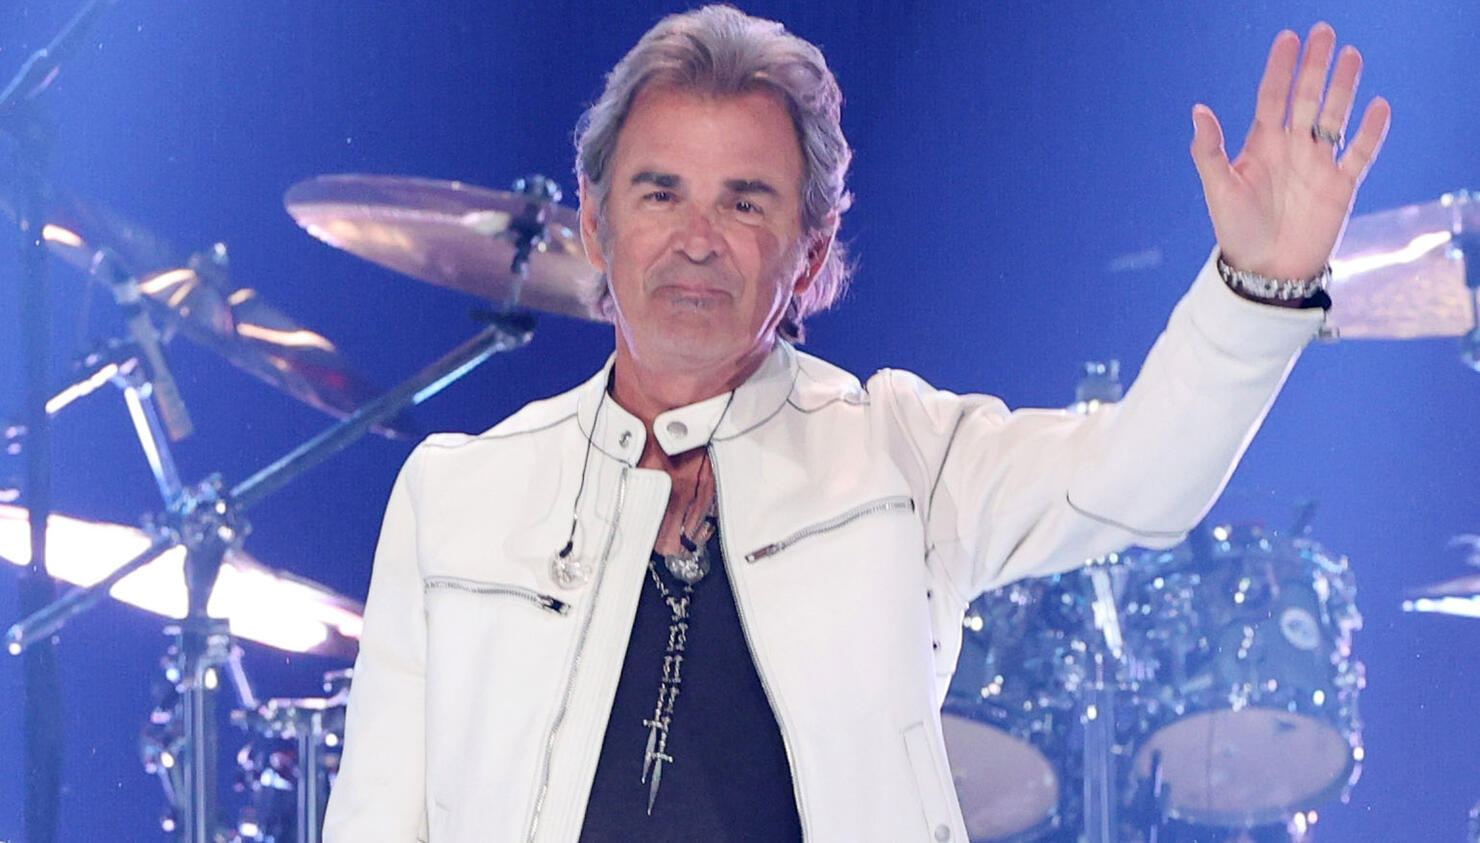 Jonathan Cain Confirms He Will Tour With Journey Despite Lawsuit iHeart